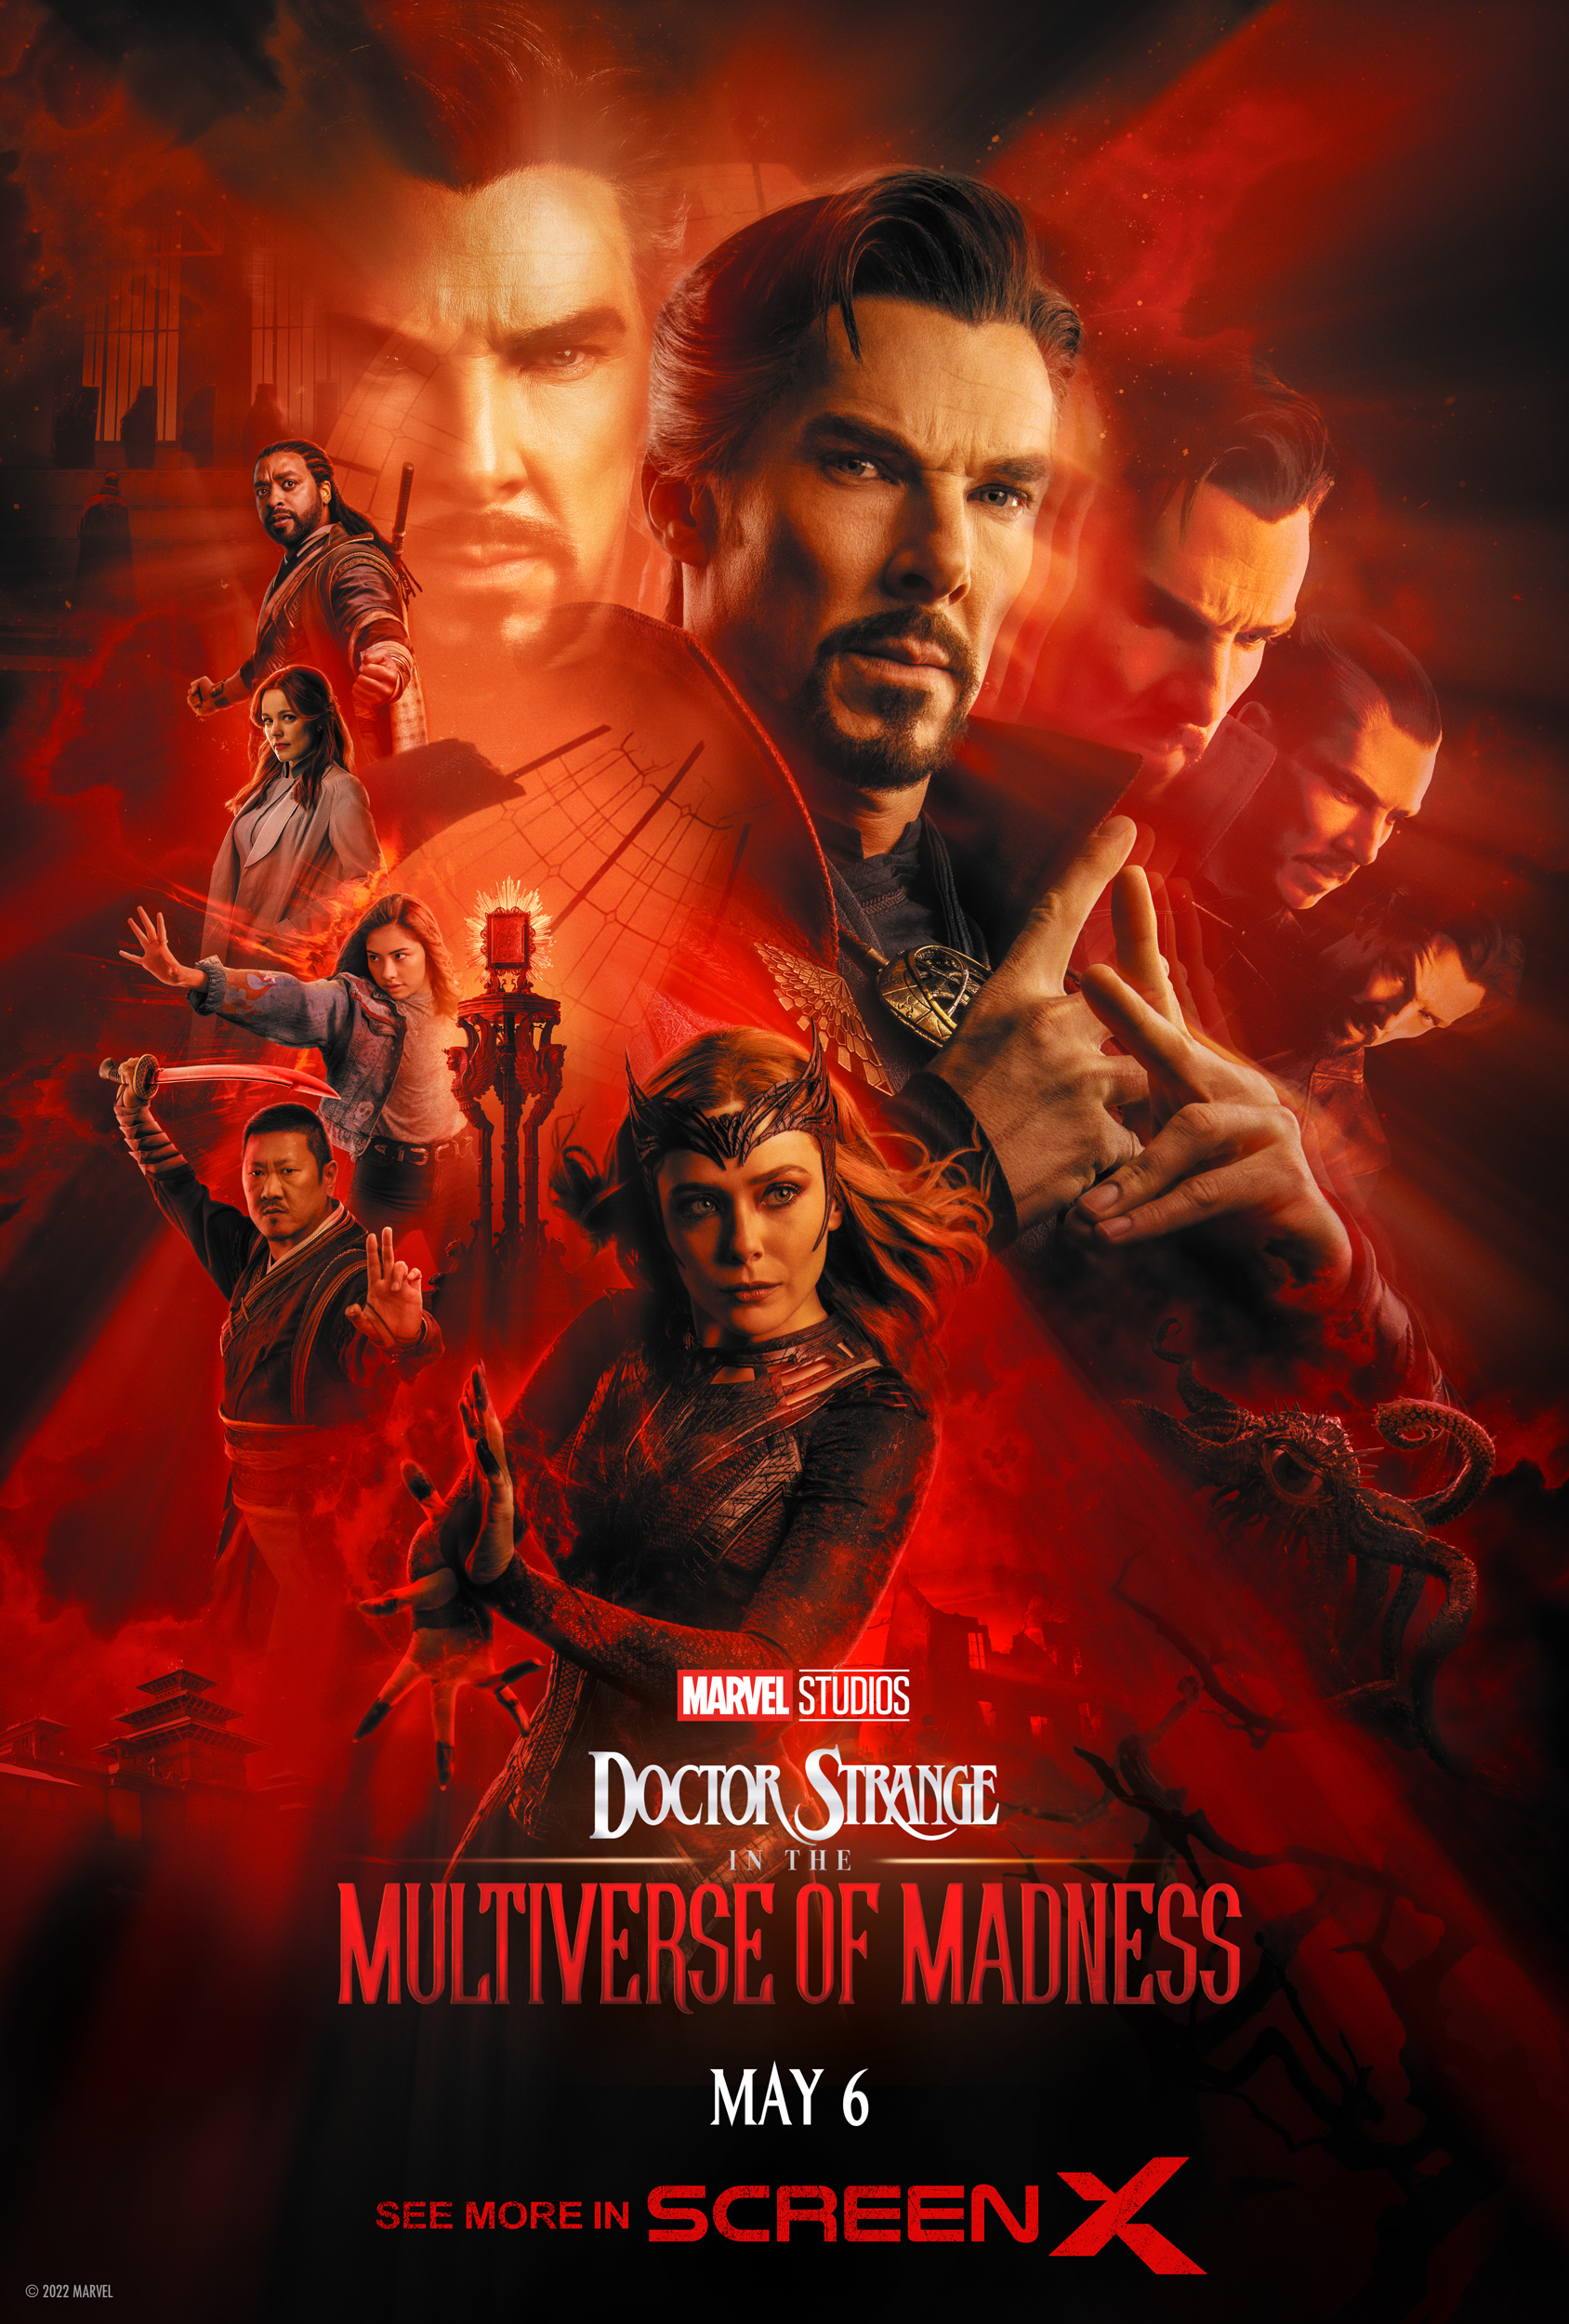 Doctor Strange in the Multiverse of Madness (2022) 720p HDRip x264 ESubs ORG. [Dual Audio] [Hindi or English] [1.1GB] Full Hollywood Movie Hindi